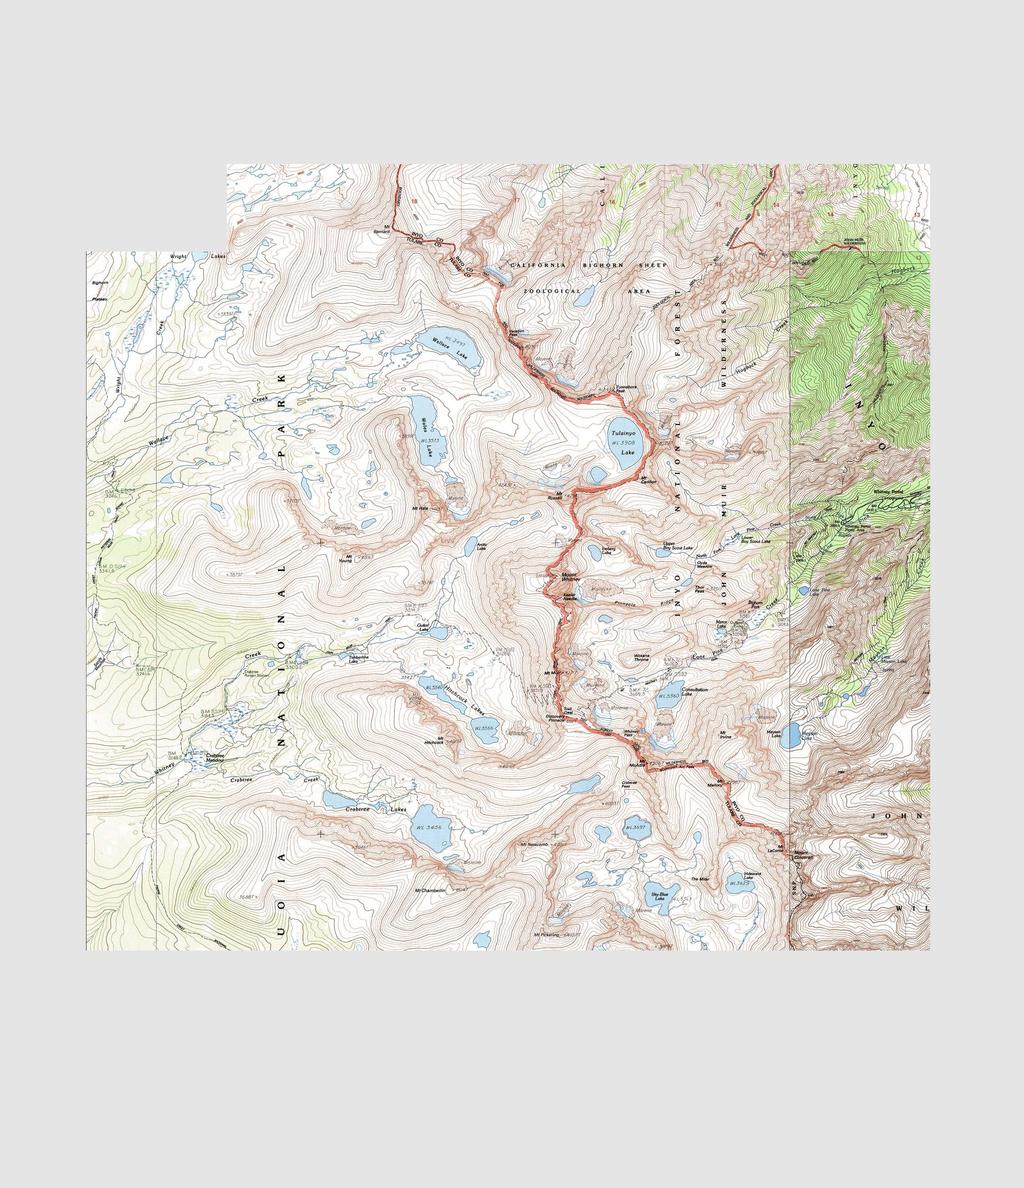 TOPO! map pinted on 07/05/15 fom Day 4 Cottonwood 2012.